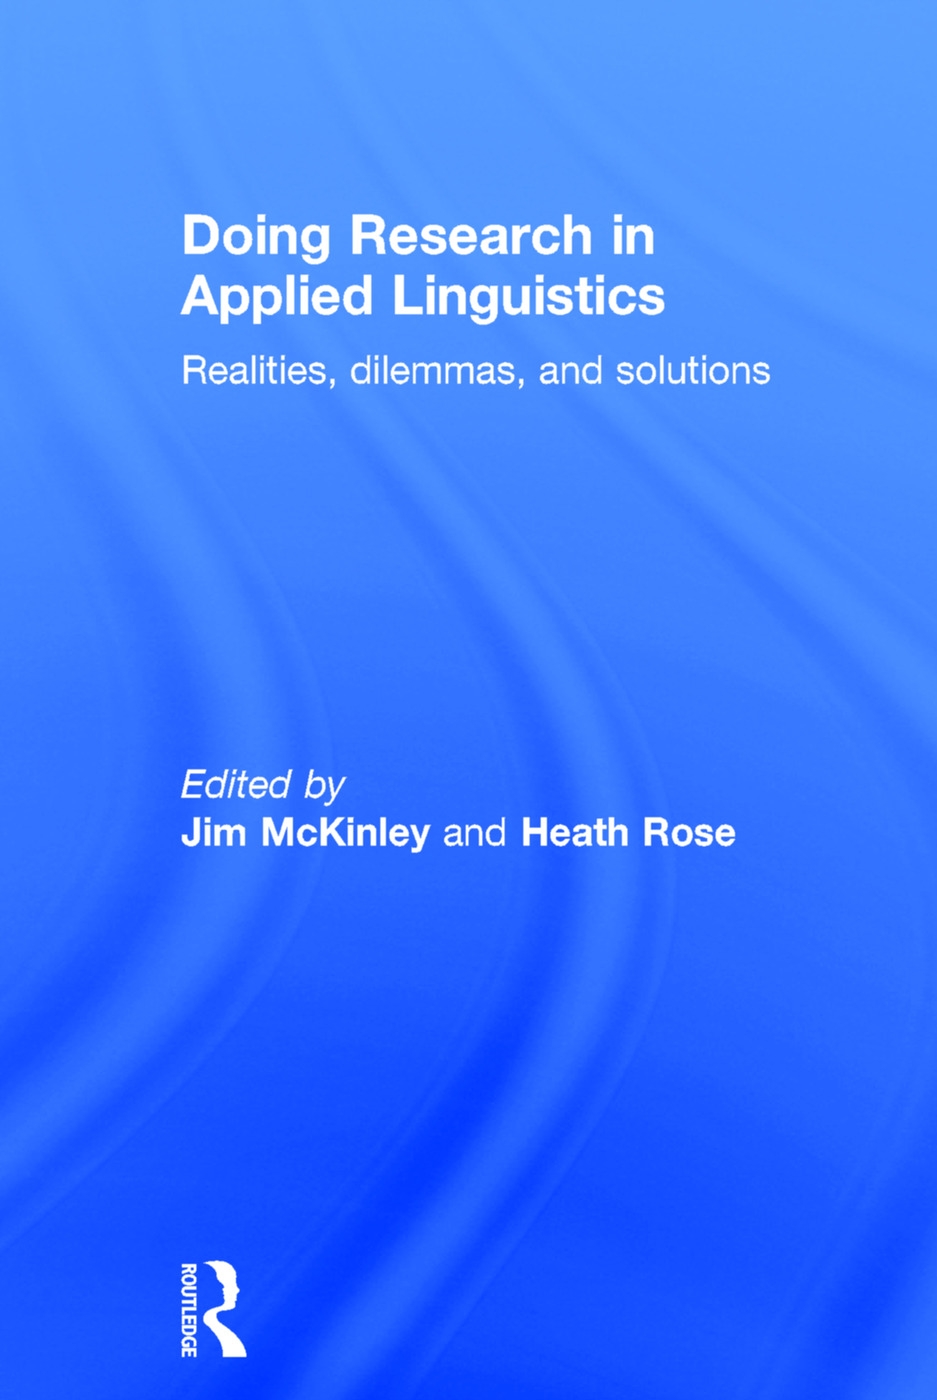 Doing Research in Applied Linguistics: Realities, Dilemmas, and Solutions